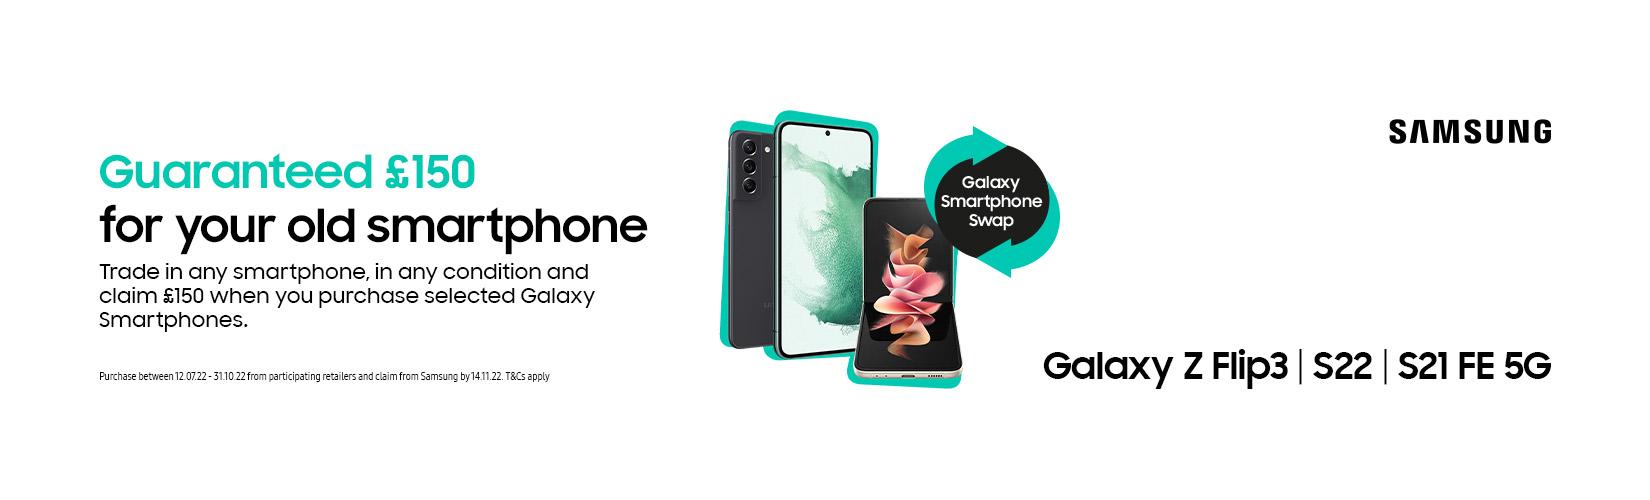 Samsung. Guaranteed £150 for your old smartphone. Trade in any smartphone, in any condition and claim £150 when you purchase selected Galaxy smartphones.